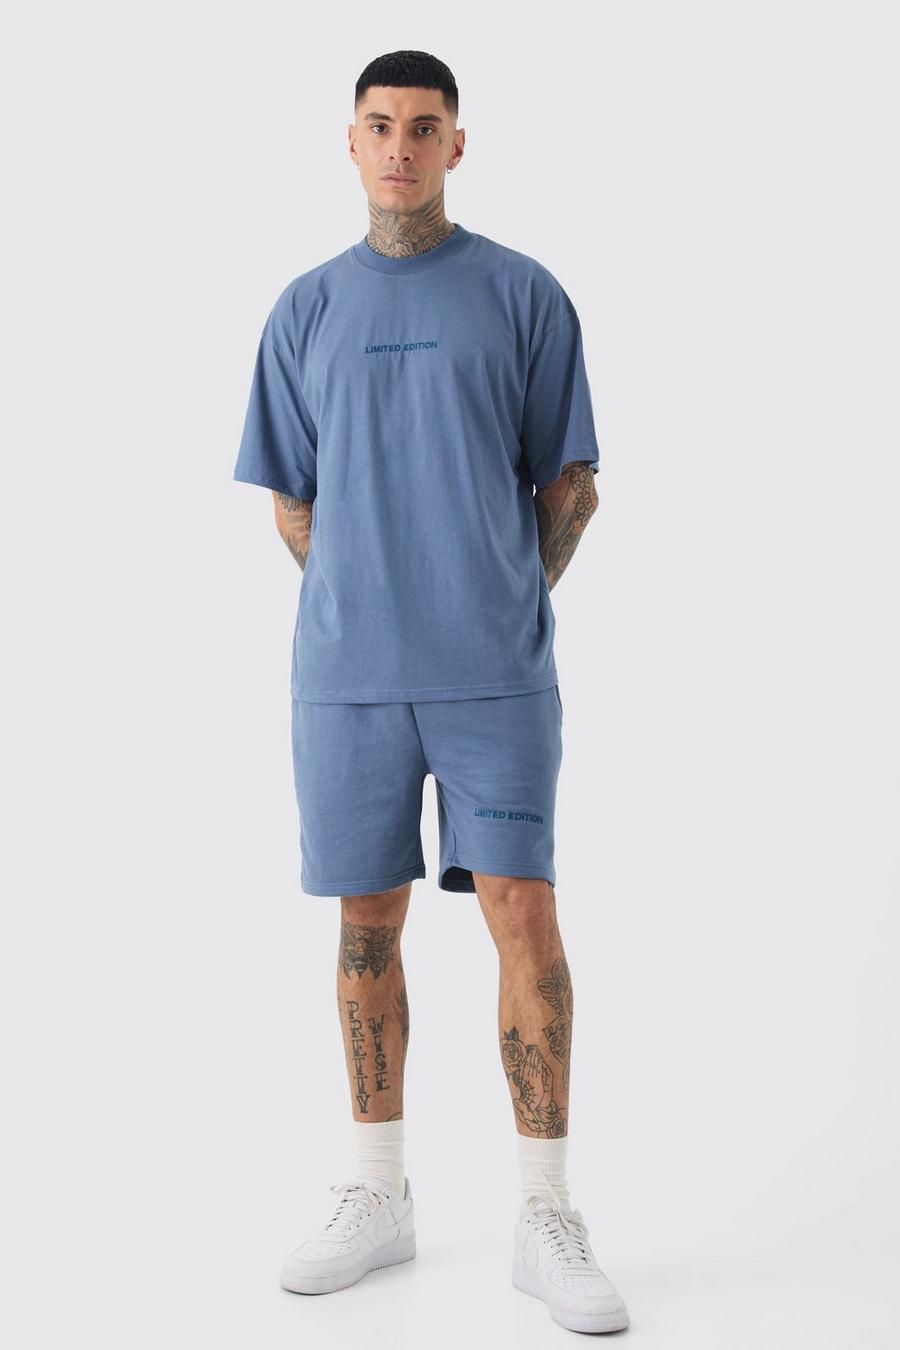 Petrol Tall Limited Edition Embroidered Oversized Tee & Short Set